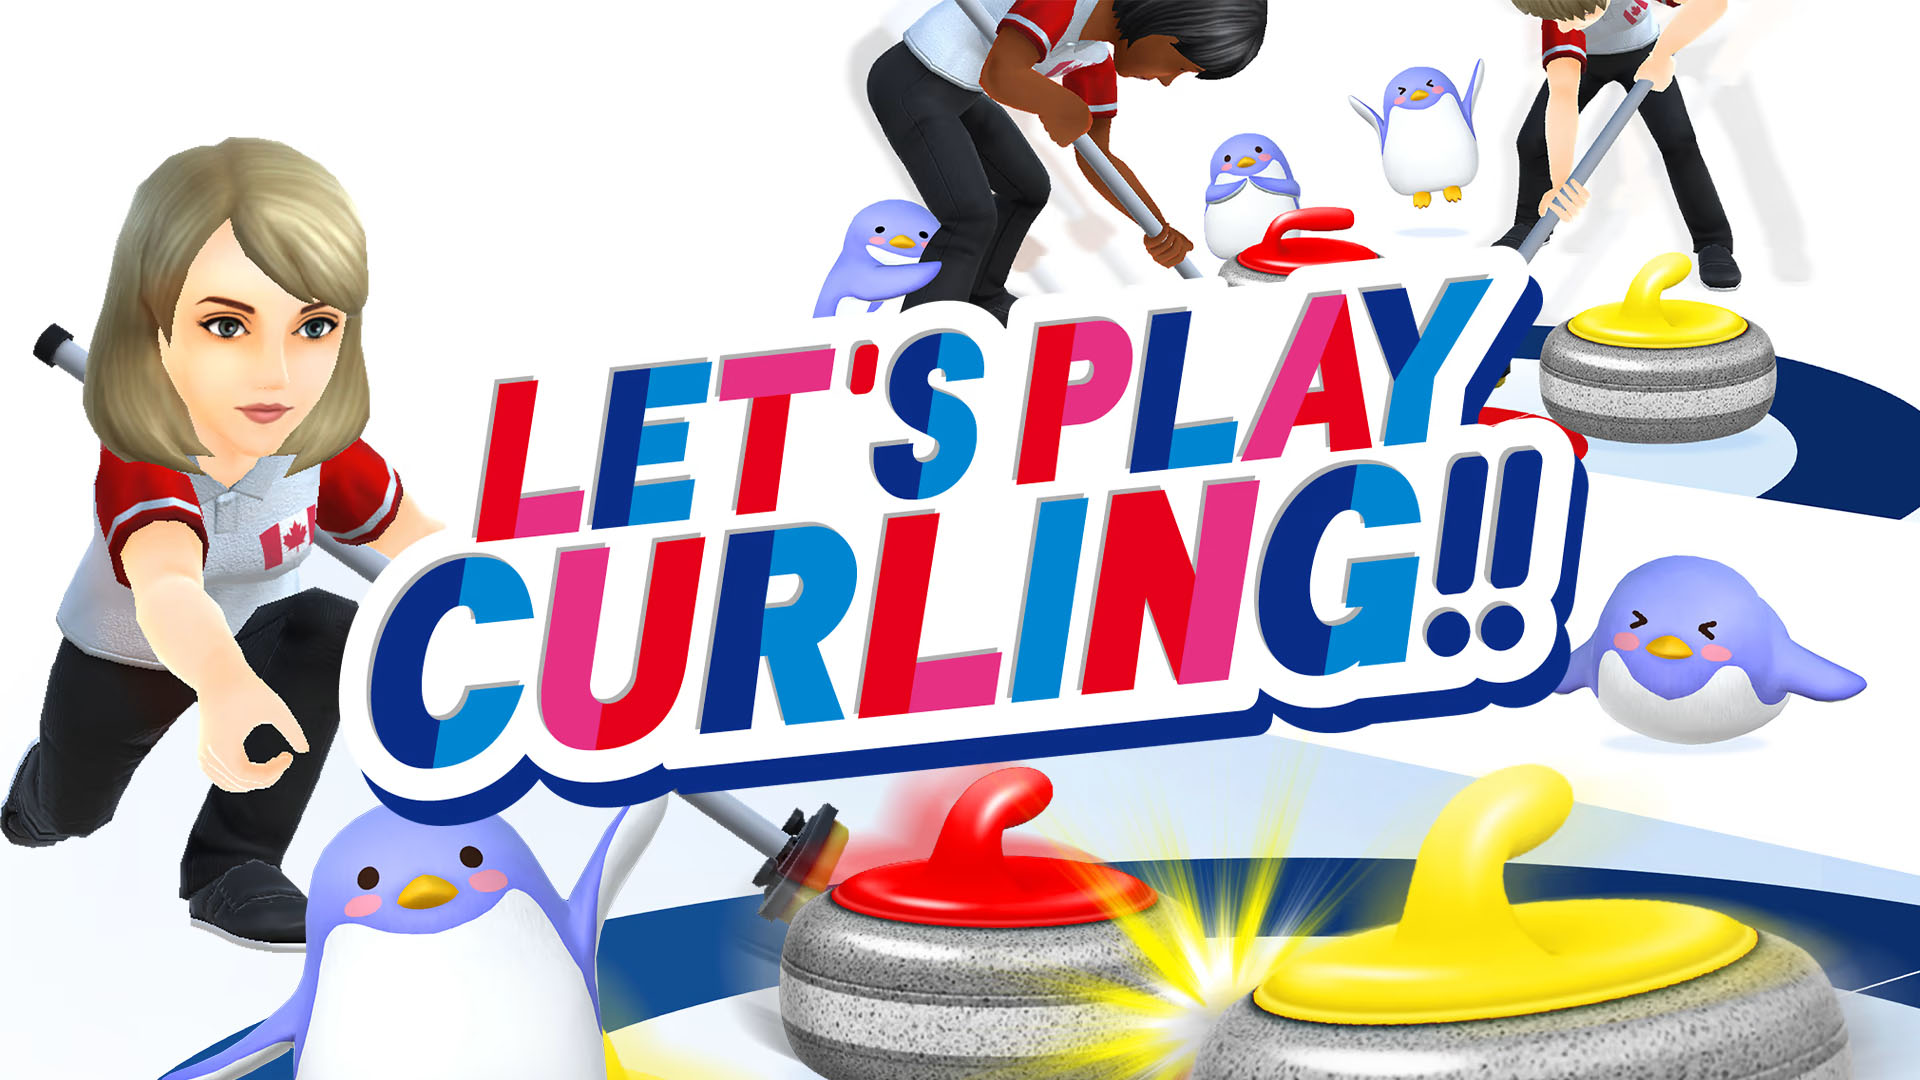 Let's Play Curling